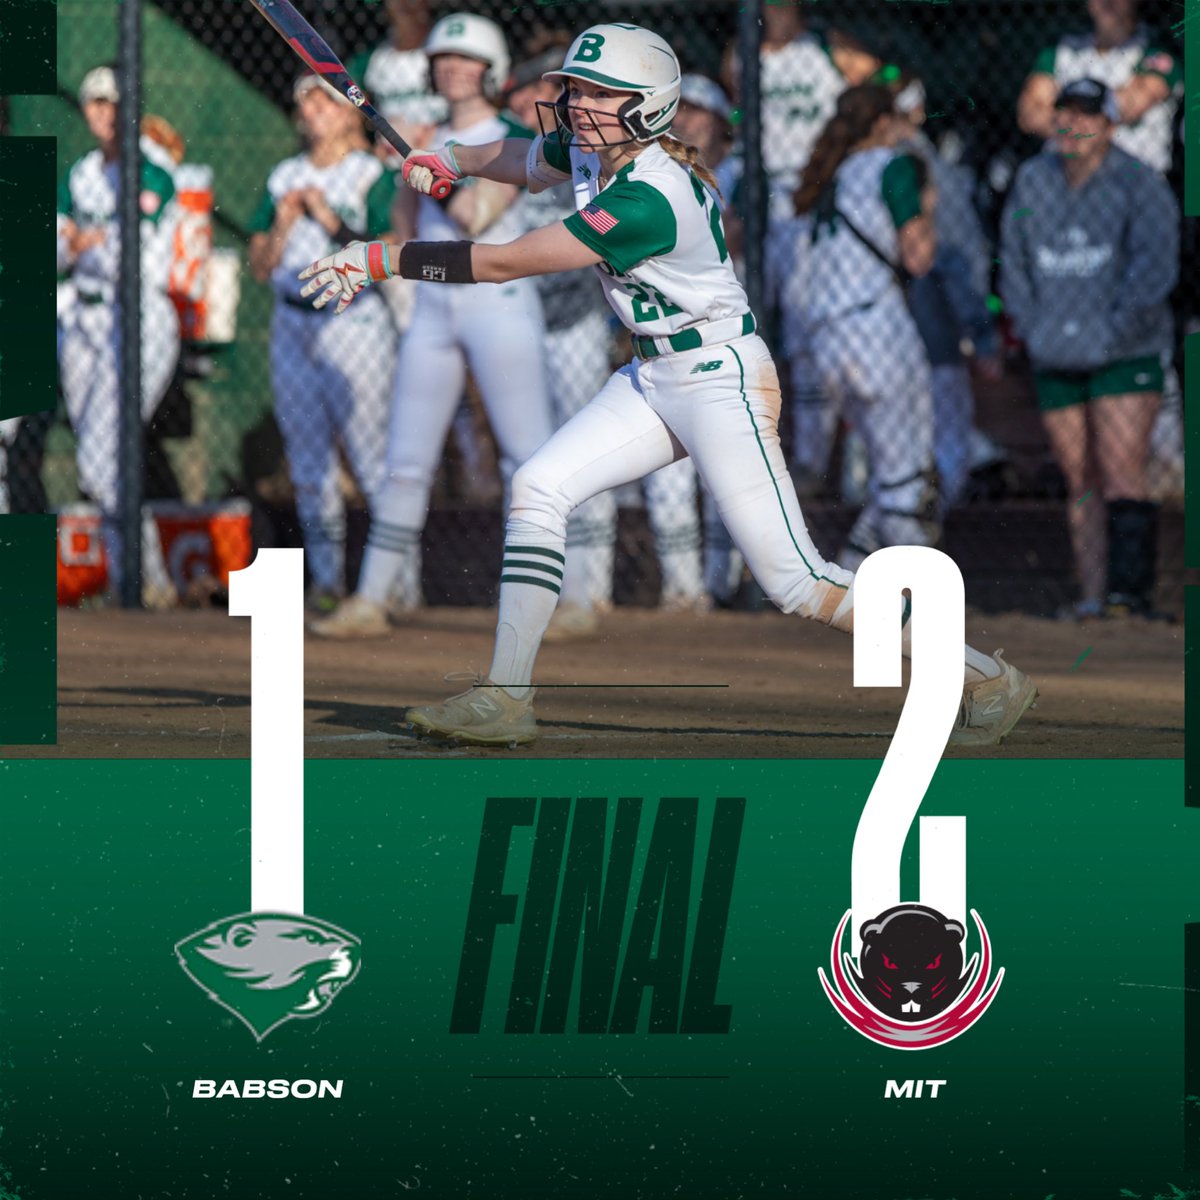 Tough 8 inning loss, but the Beavers are ready to fight their way out of the loser’s bracket🦫🥎

#GoBabo #StrictlyBusiness #EveryDamDay